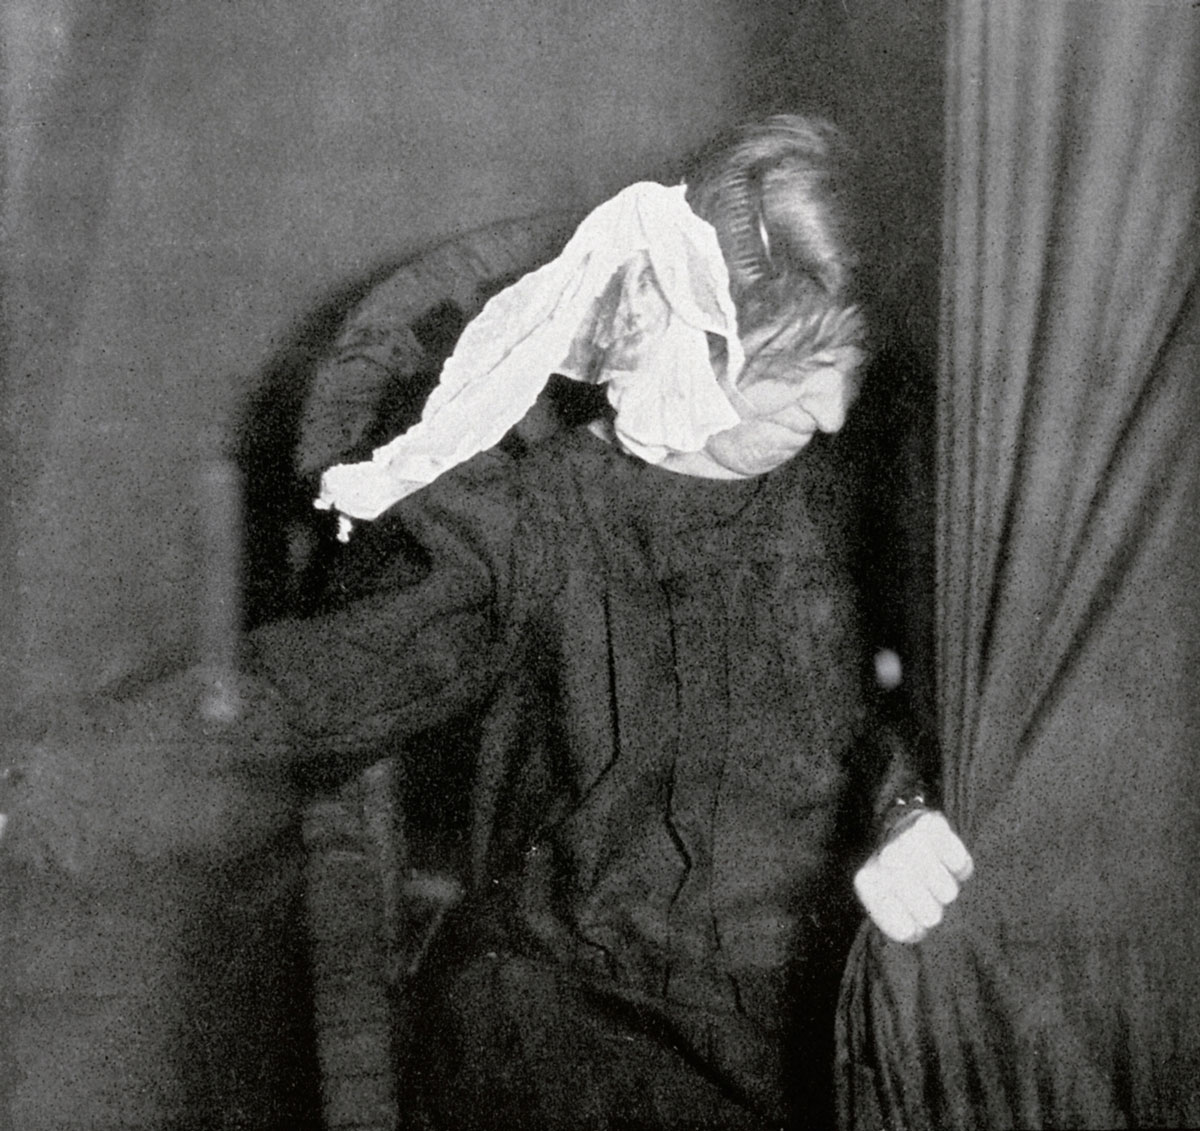 A photograph of Eva C. walking out from behind the curtain during the séance of 22 November 1911.